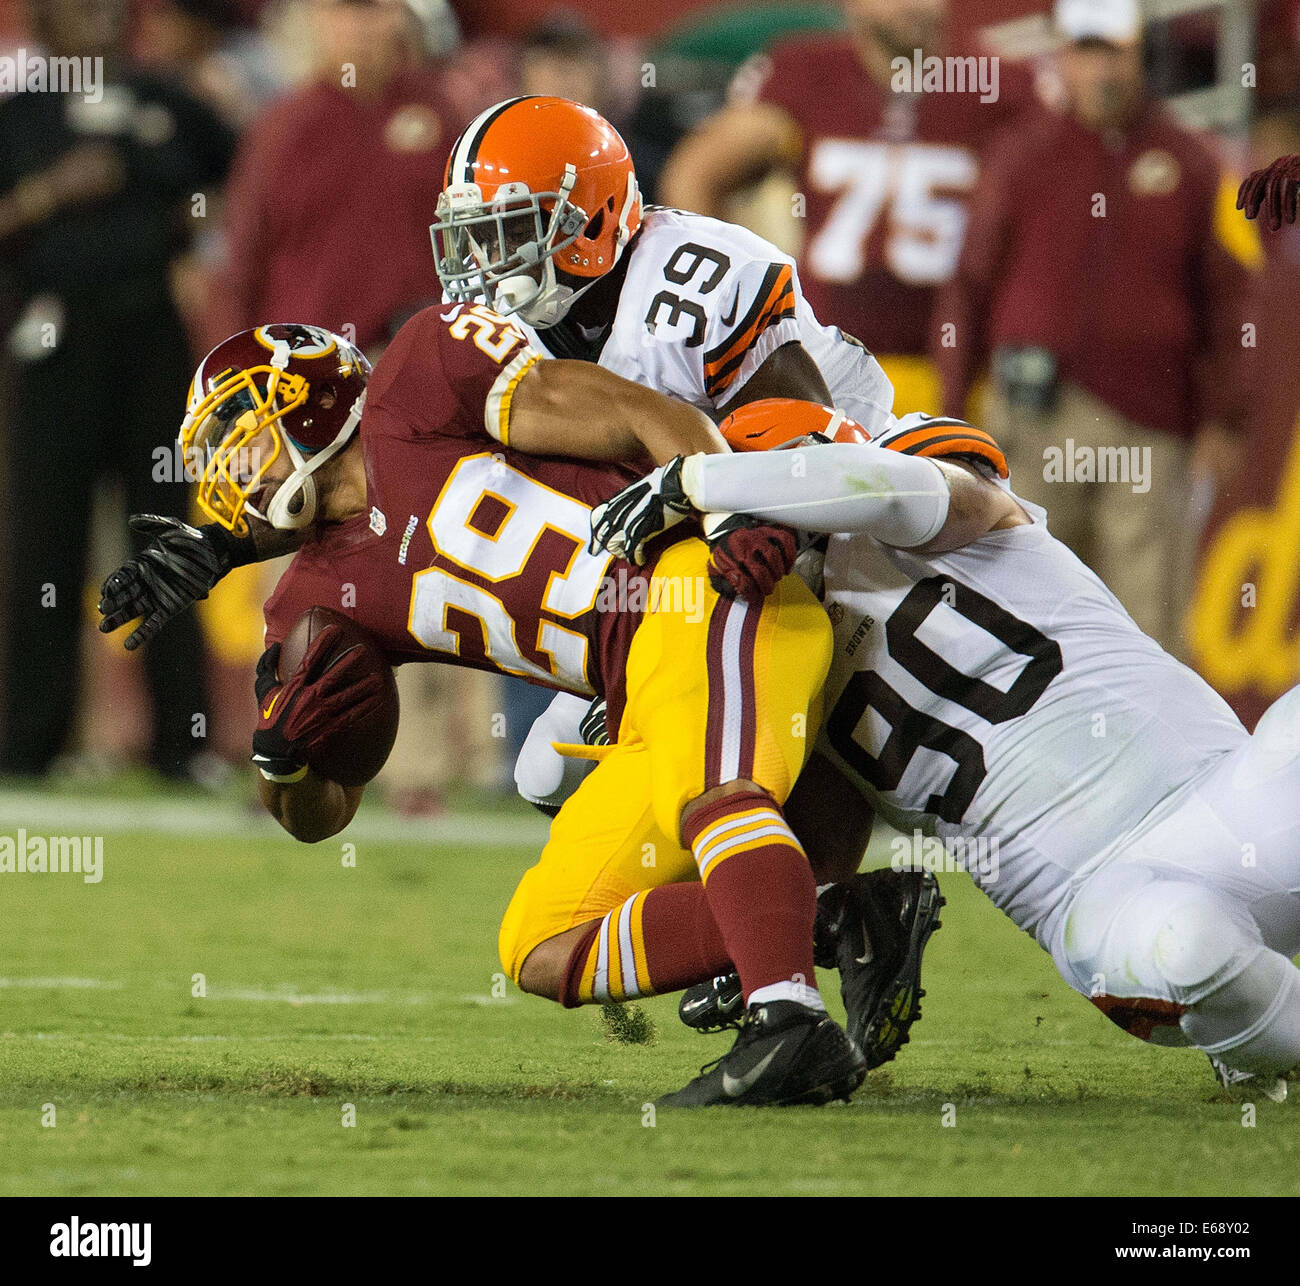 Washington, DC, USA. 18th Aug, 2014. Washington Redskins running back Roy Helu (29) is tackled by Cleveland Browns defensive end Billy Winn (90) during the first half of their NFL preseason game at FedEx Field in Landover, MD Monday, August 18, 2014. © Harry E. Walker/ZUMA Wire/Alamy Live News Stock Photo